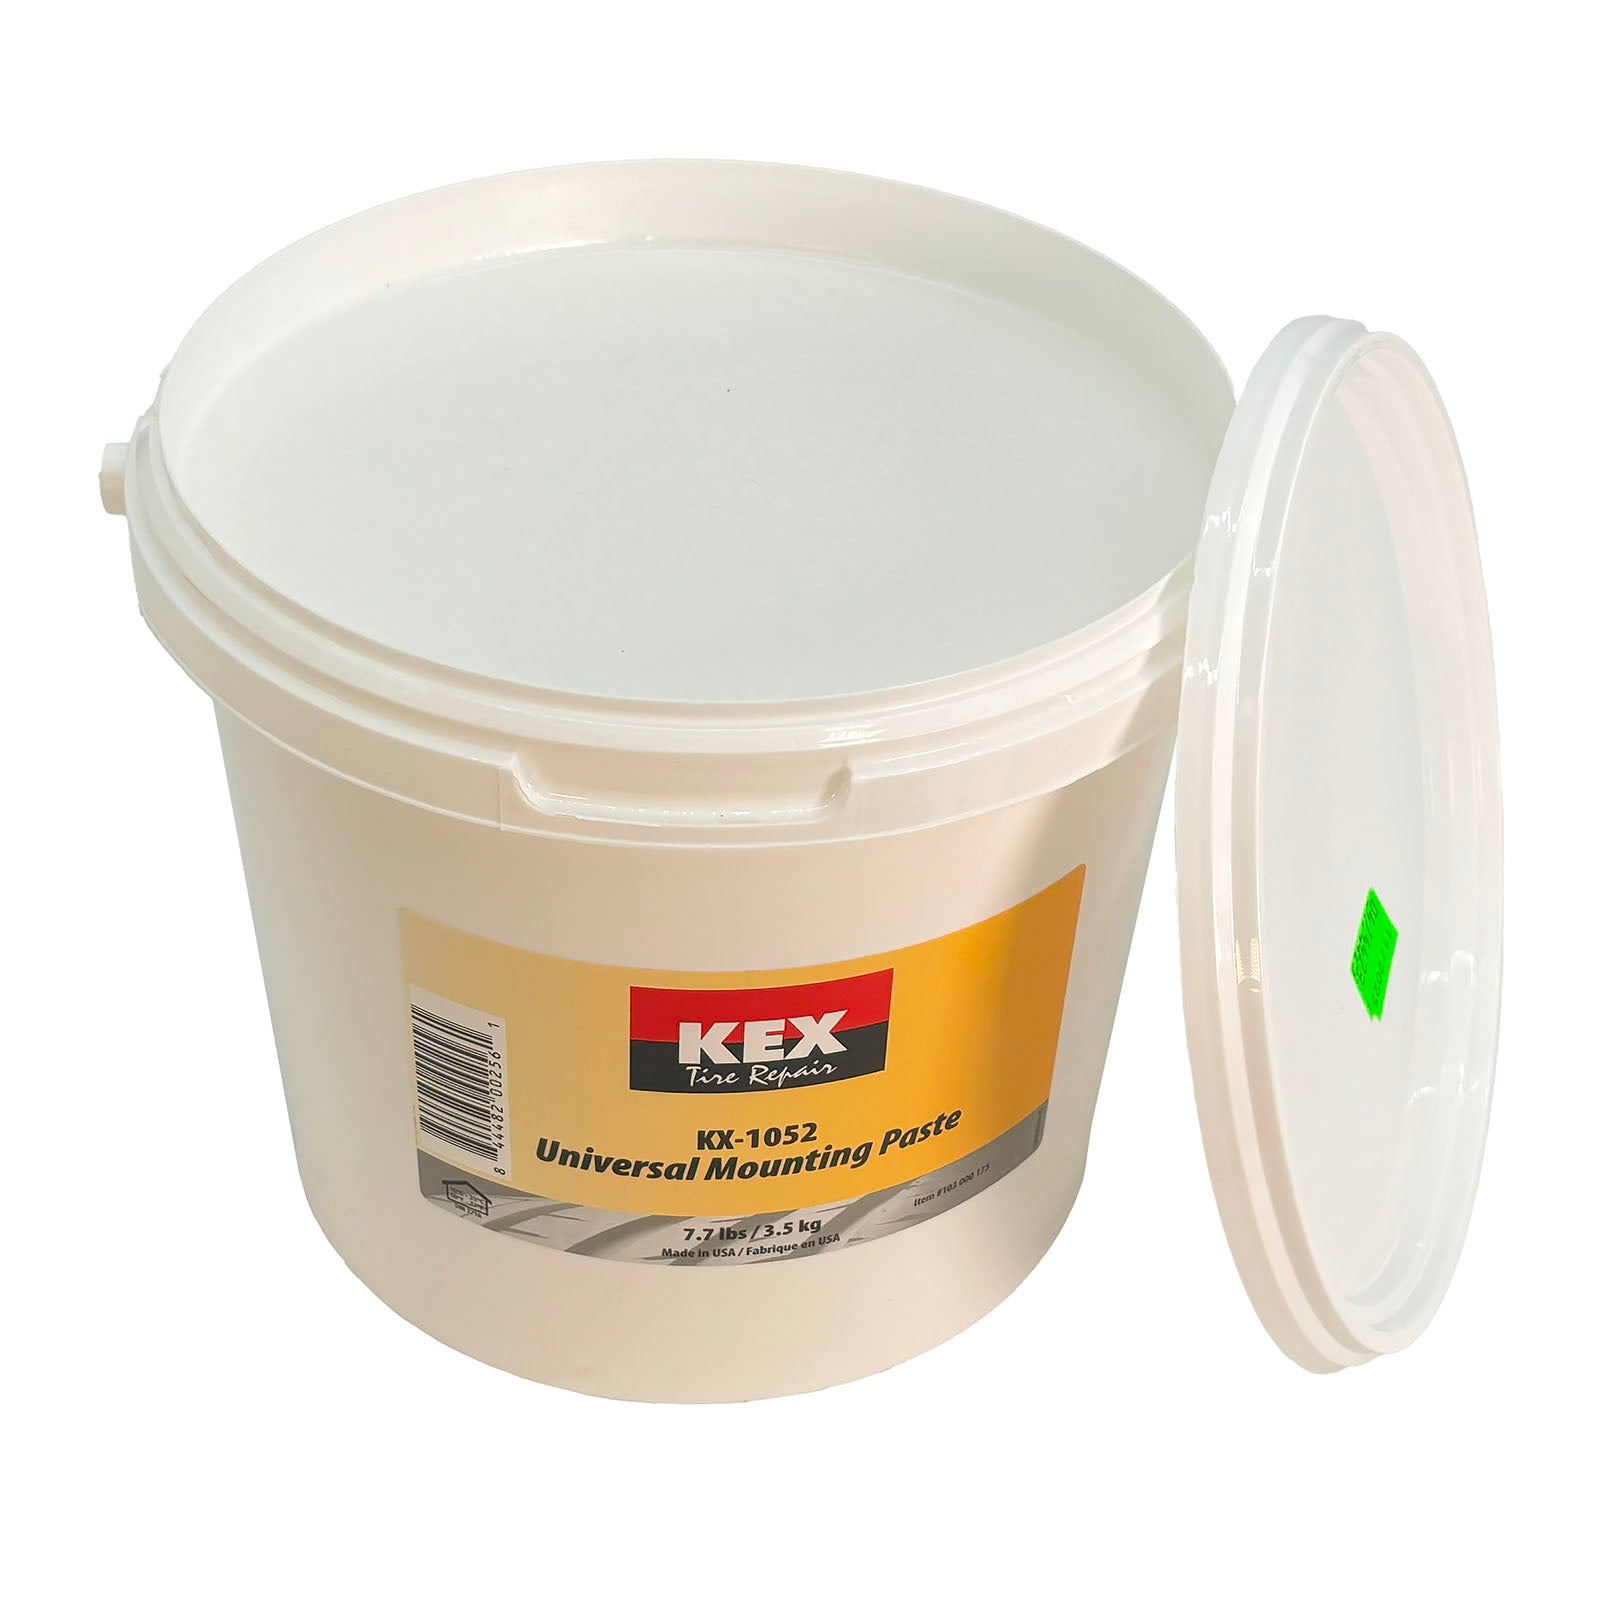 Kex 1052 Tire Mounting Paste - 7.75 lb